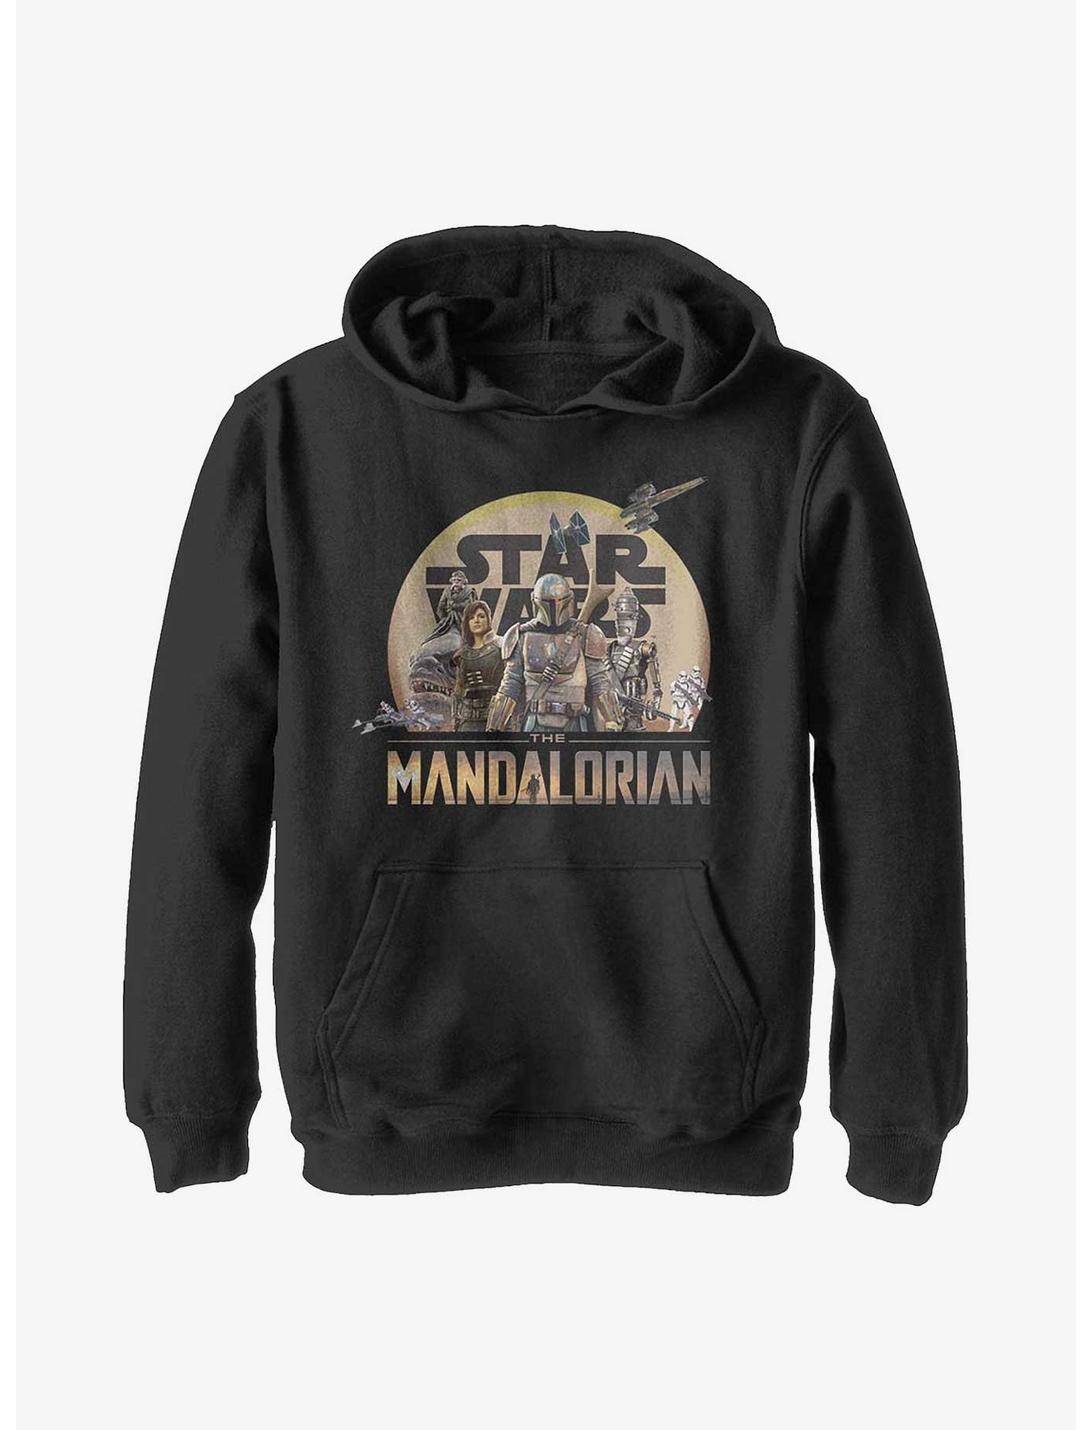 Plus Size Star Wars The Mandalorian Character Action Pose Youth Hoodie, BLACK, hi-res